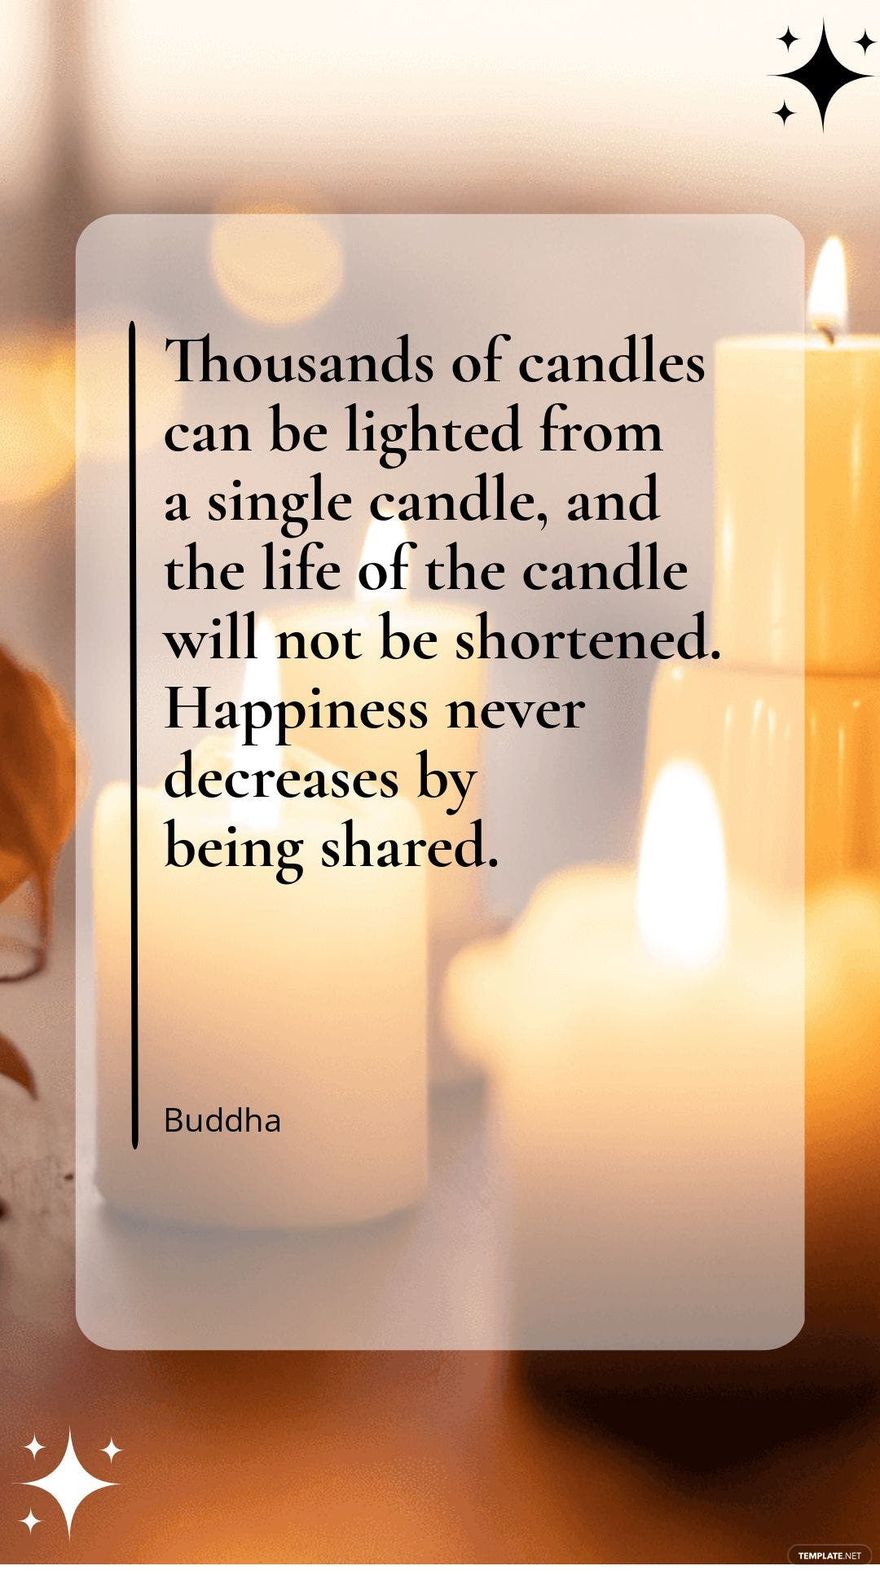 Buddha - Thousands of candles can be lighted from a single candle, and the life of the candle will not be shortened. Happiness never decreases by being shared.